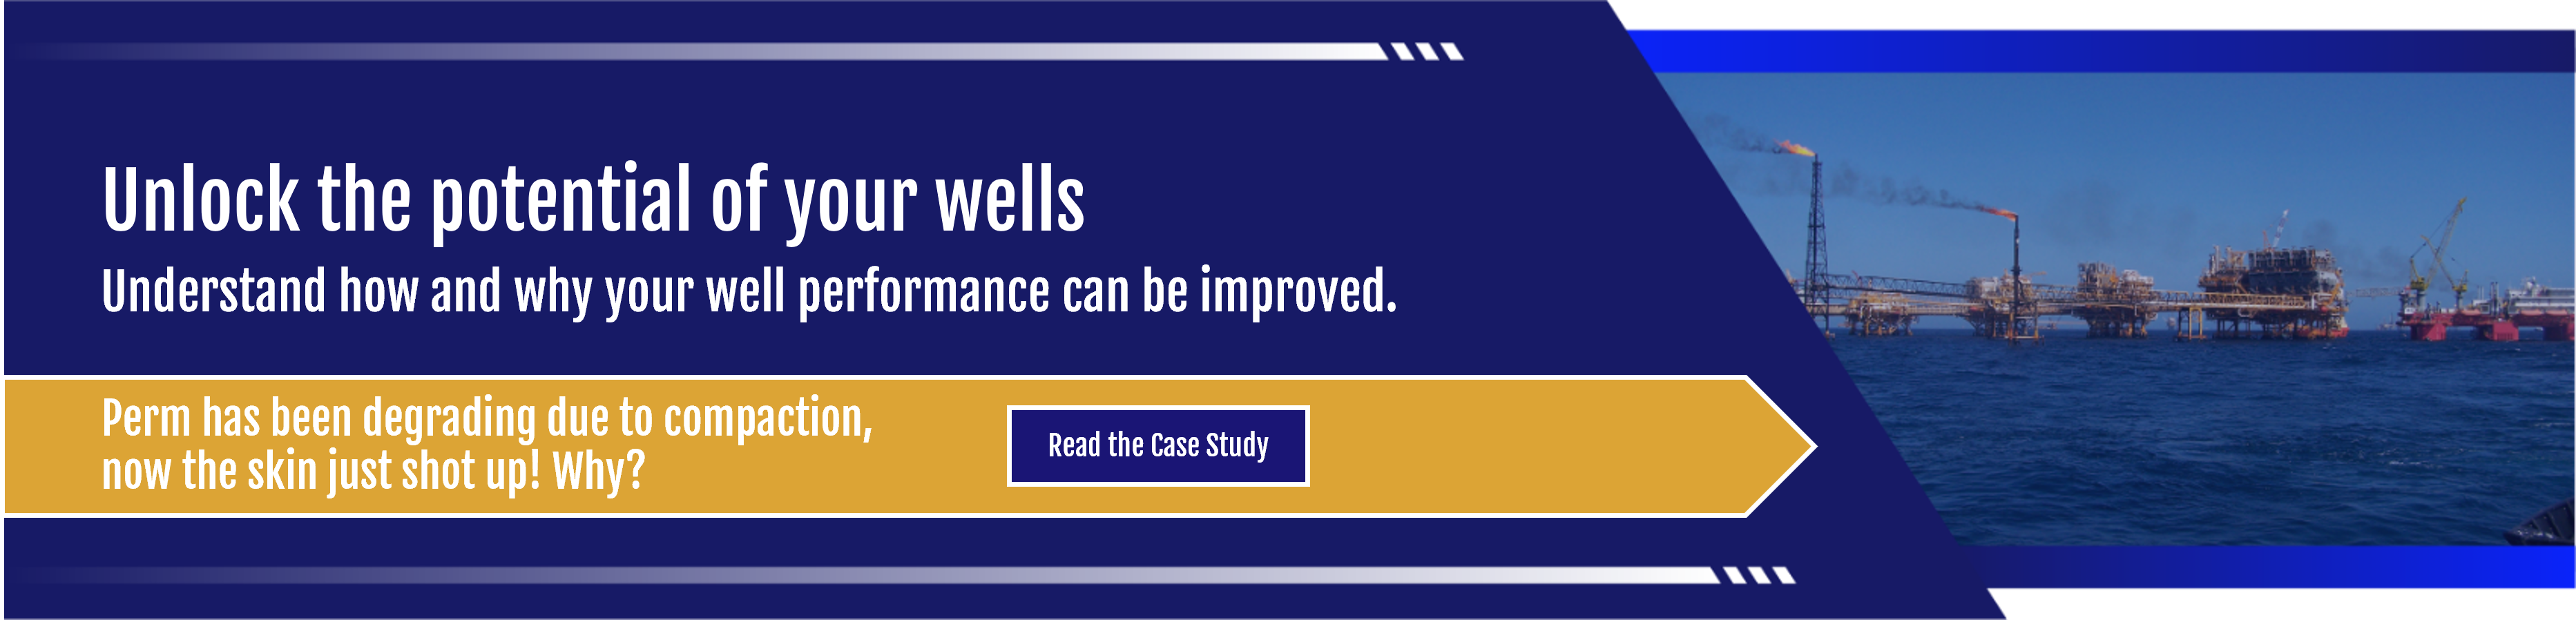 Unlock the potential of your wells. Understand how and why your well performance can be improved.